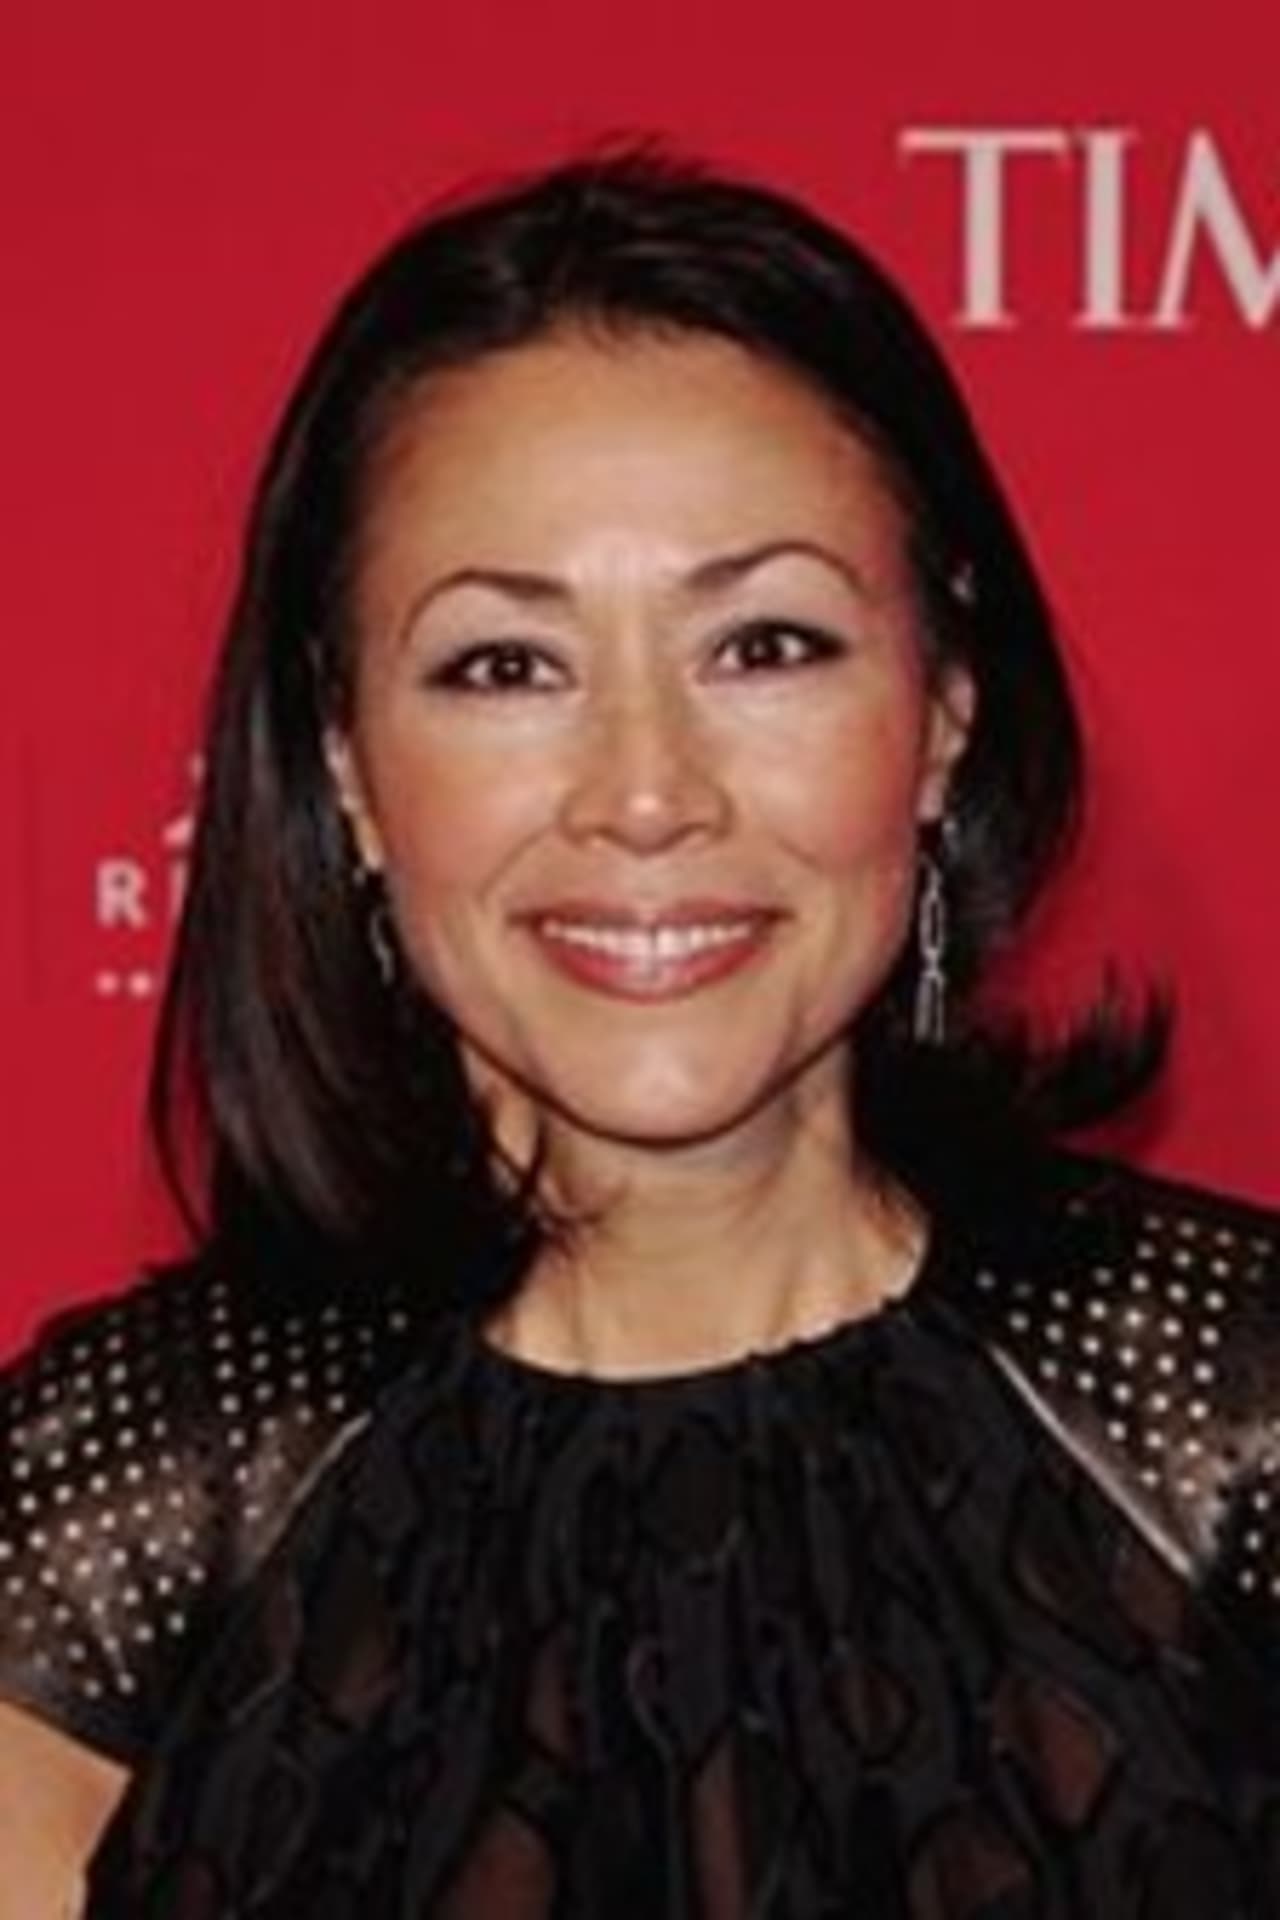 New Canaan resident Ann Curry will leave NBC after 25 years with the network.